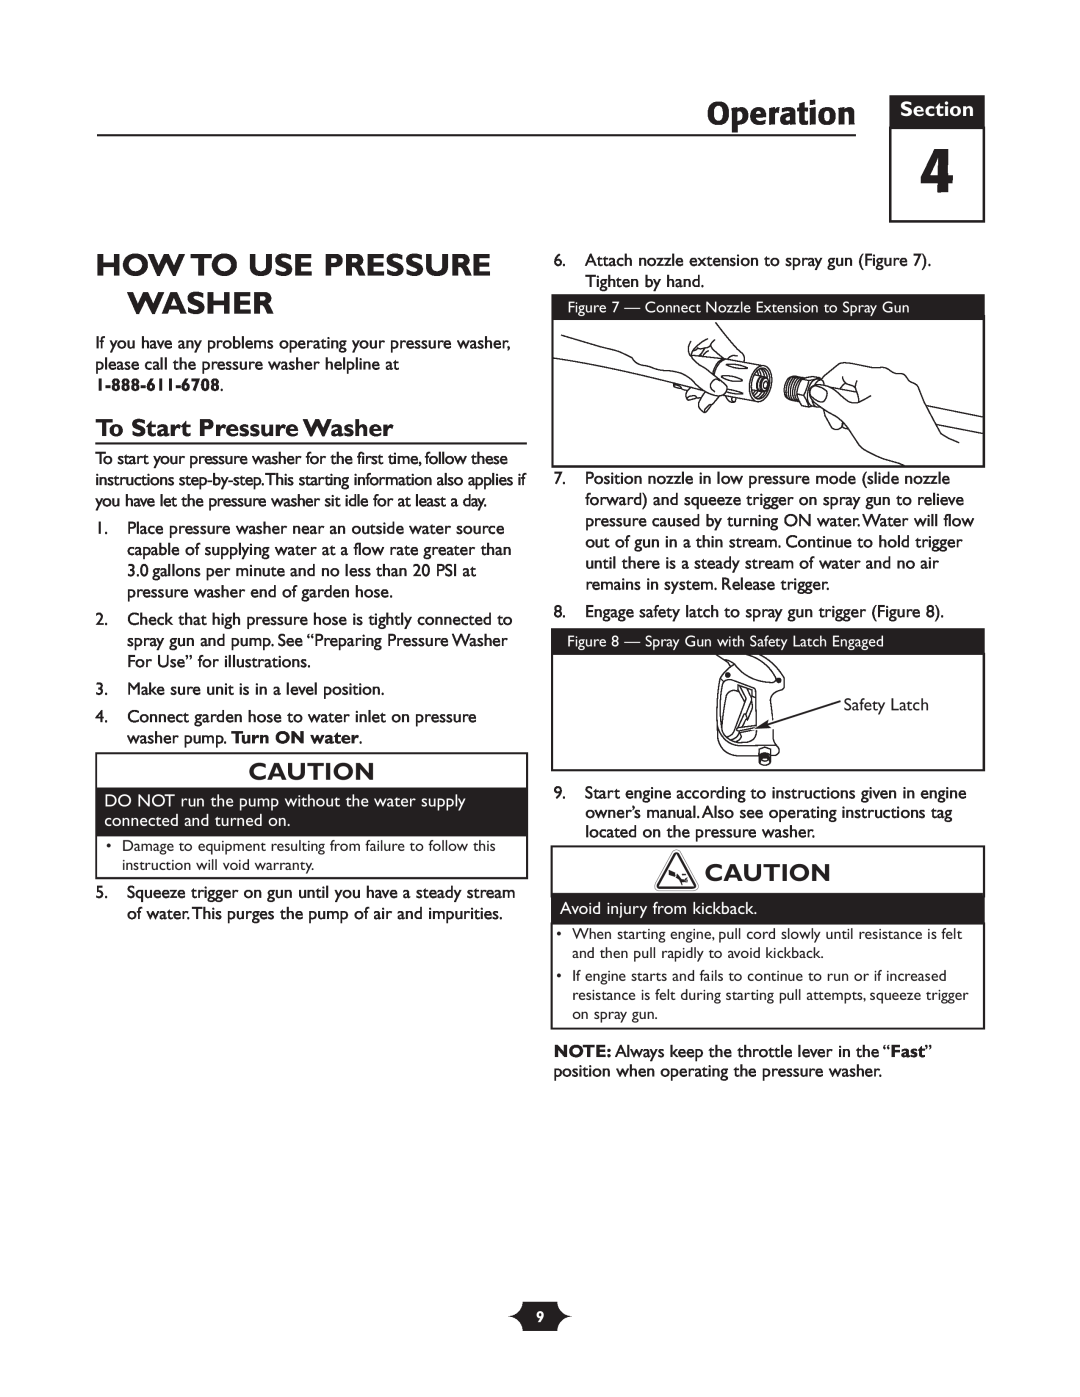 Troy-Bilt 20207 manual Operation Section, How To Use Pressure, To Start Pressure Washer, Avoid injury from kickback 